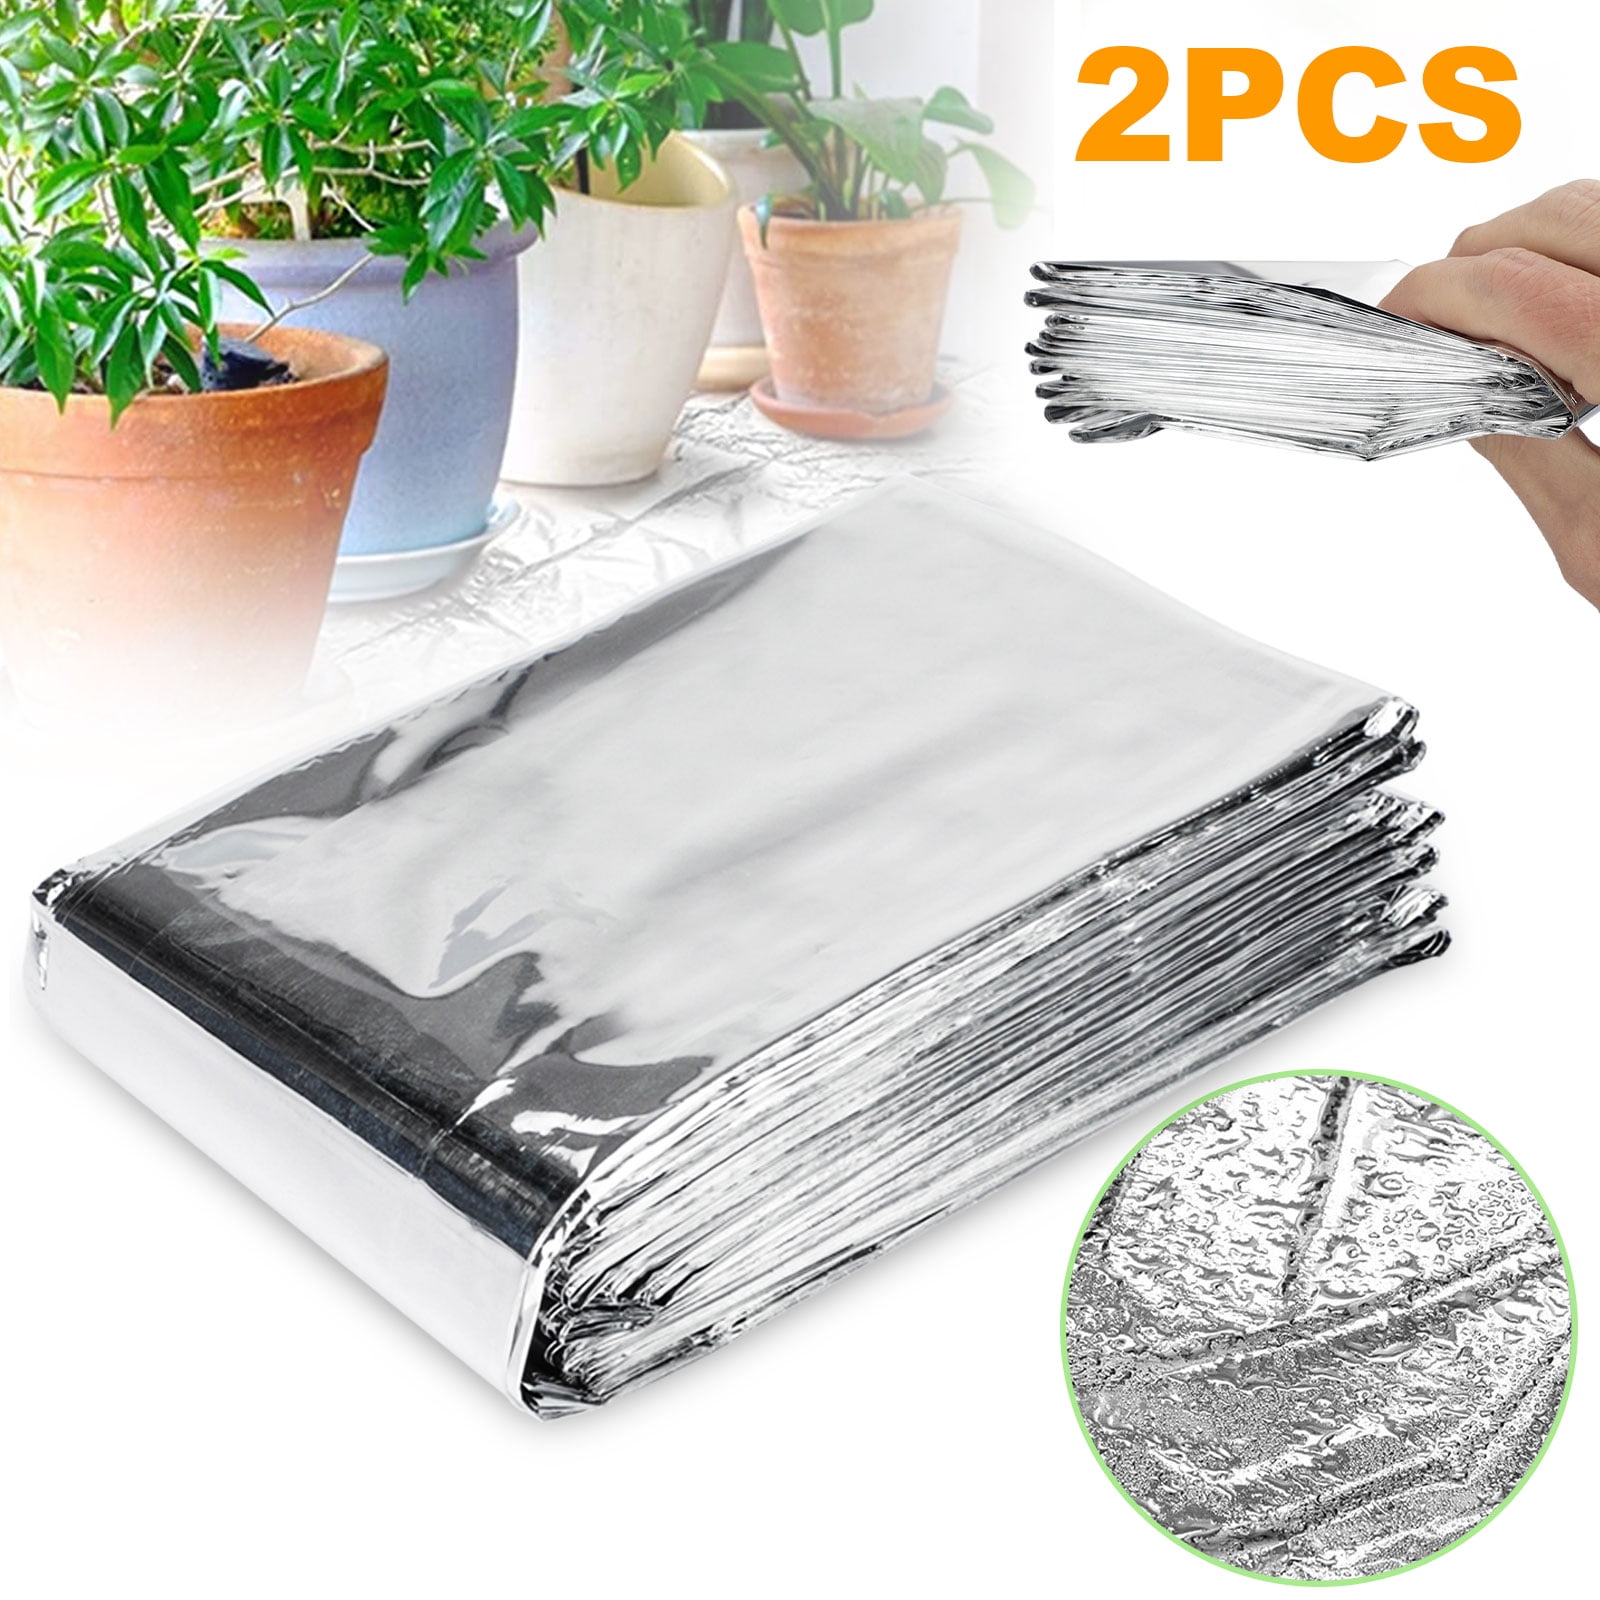 XIPEGPA 8 Pcs High Silver Reflective Mylar Film 83 x 51 Inch Garden Greenhouse Covering Foil Sheets Effectively Increase Plants Growth